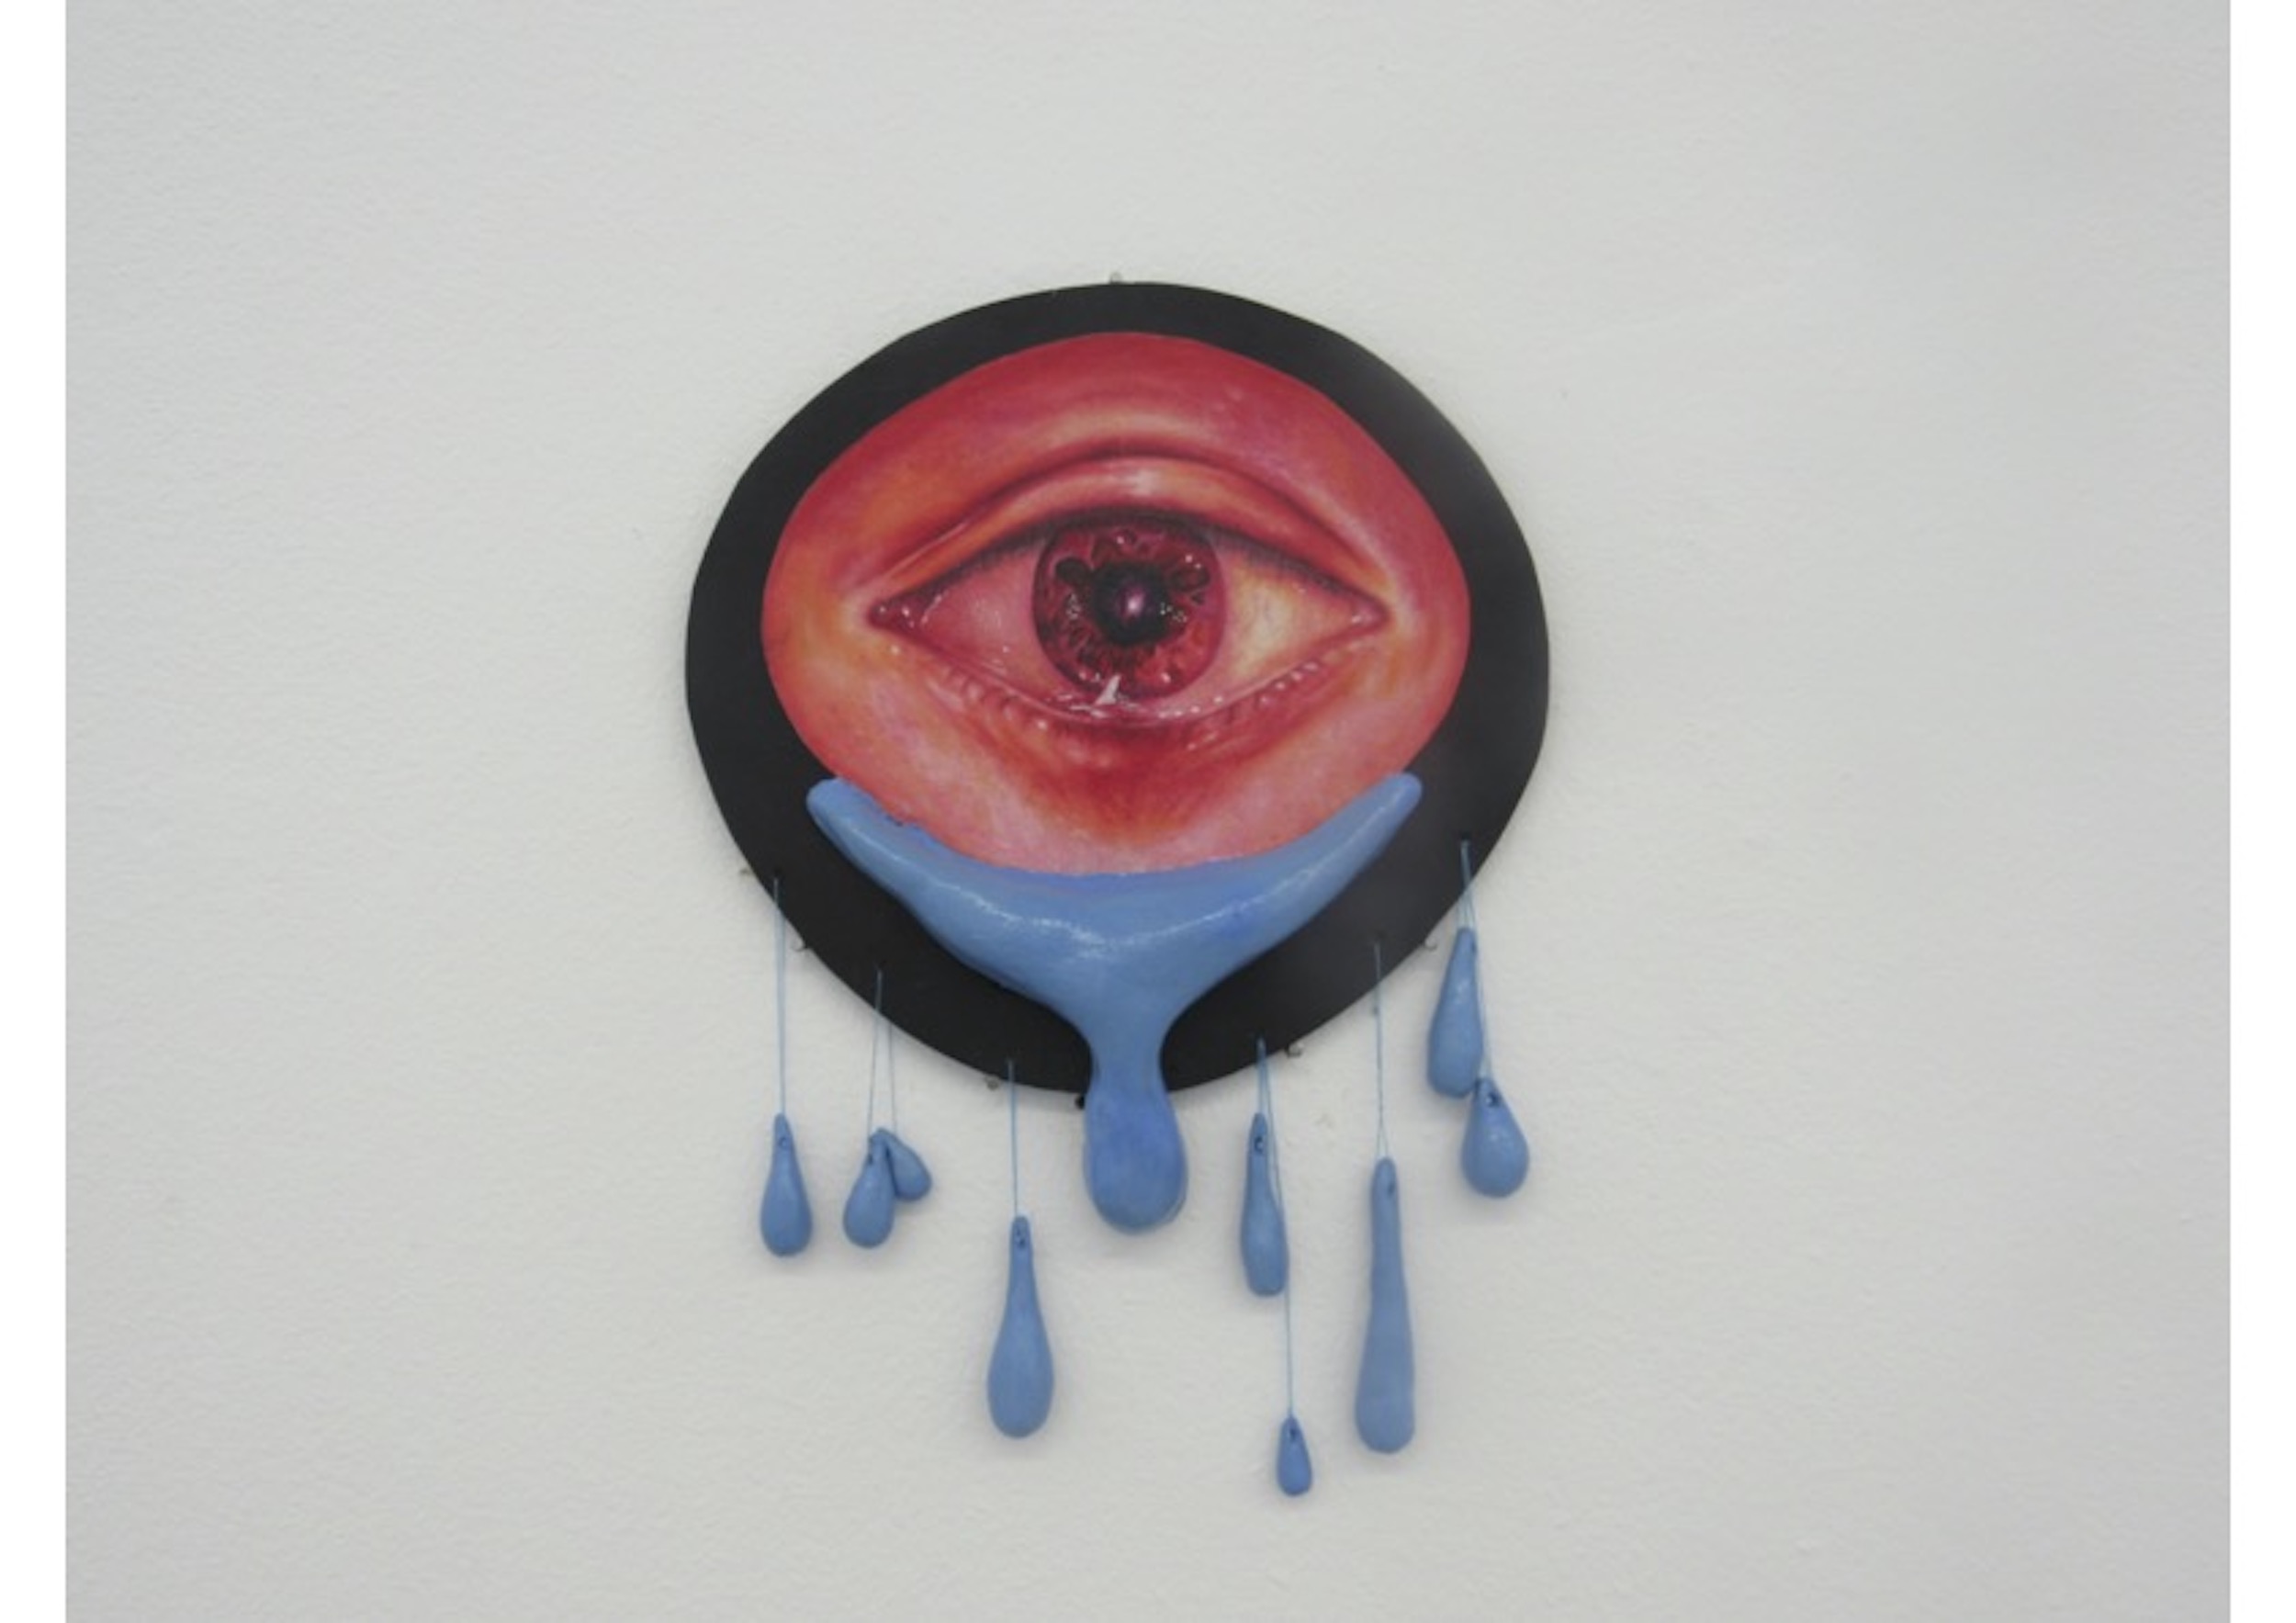 BA Fine Art work by Kate Chaplin showing a double-sided red coloured eye crying blue sculptural tears.